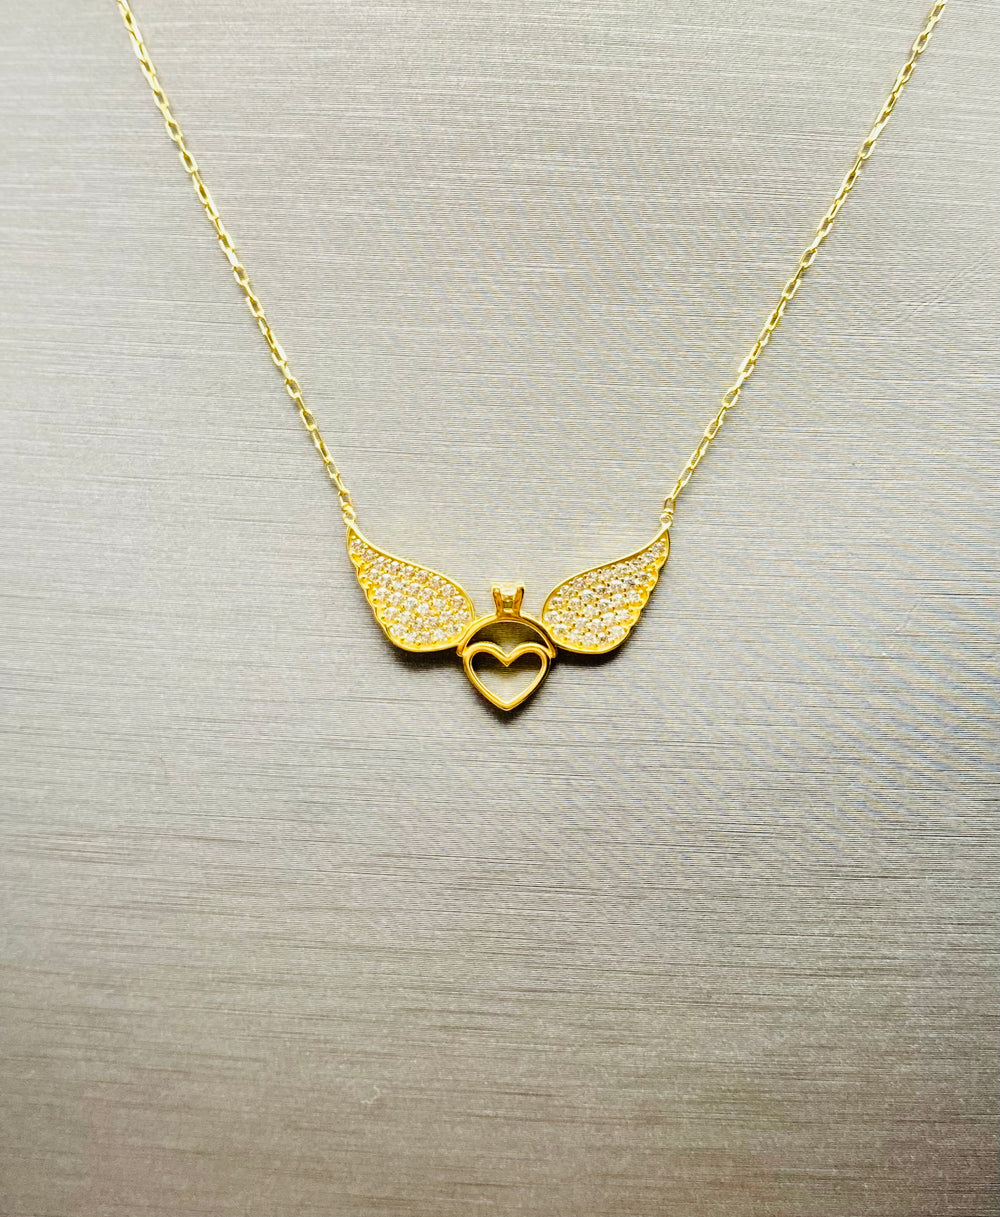 Real 10KT Gold Chain & ‘Heart Wings’ Charm with Cubic Zirconia Stones